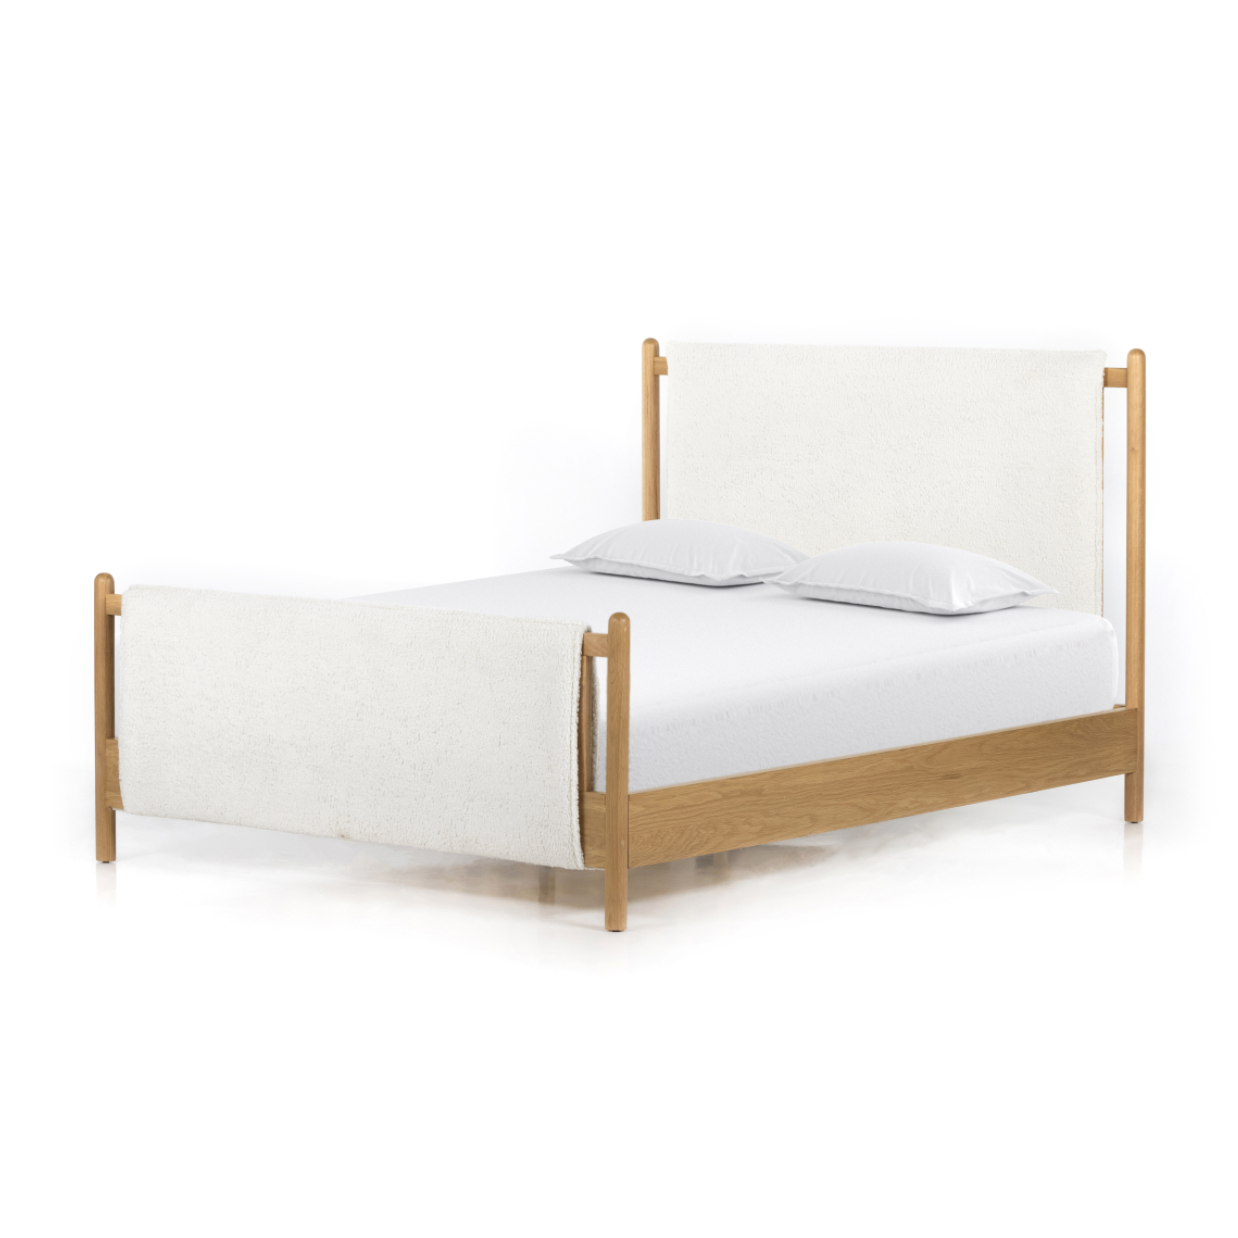 Bring a cozy hygge vibe to the bedroom with this textured Bowen Bed. Framed by light-finished solid oak, a sling-style bed features faux shearling head and foot boards -- sure to elevate any bedroom.   Queen Overall Dimensions: 64.25"w x 87.25"d x 48.00"h King Overall Dimensions: 80.25"w x 88.50"d x 48.00"h